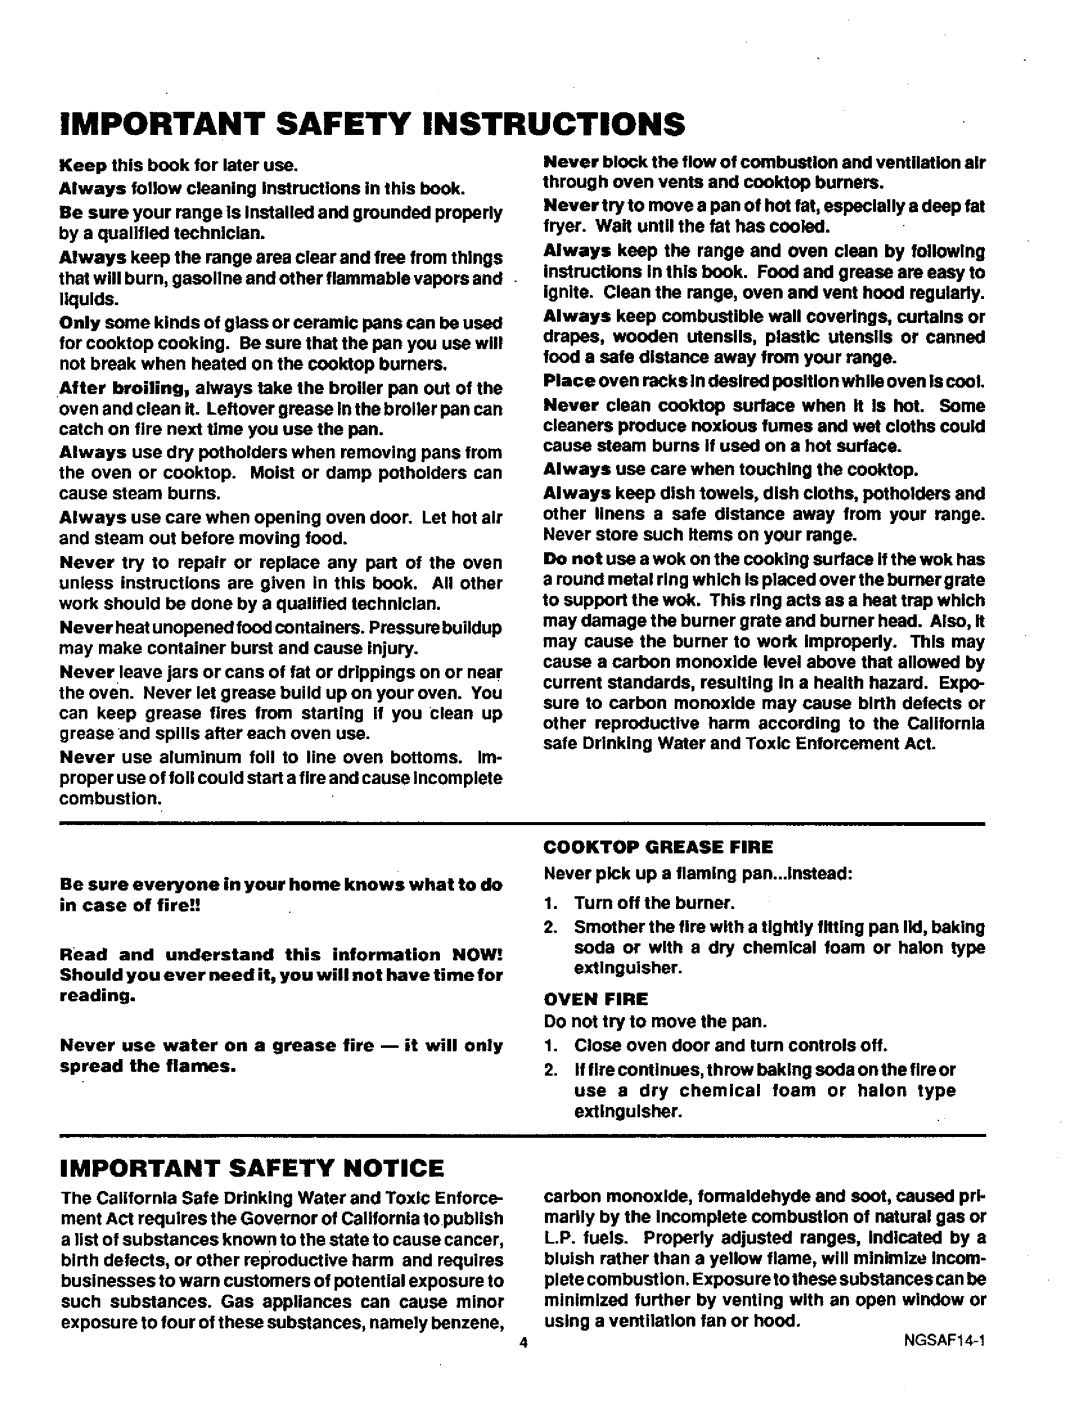 Sears 71381 warranty Important Safety Instructions, Important Safety Notice 